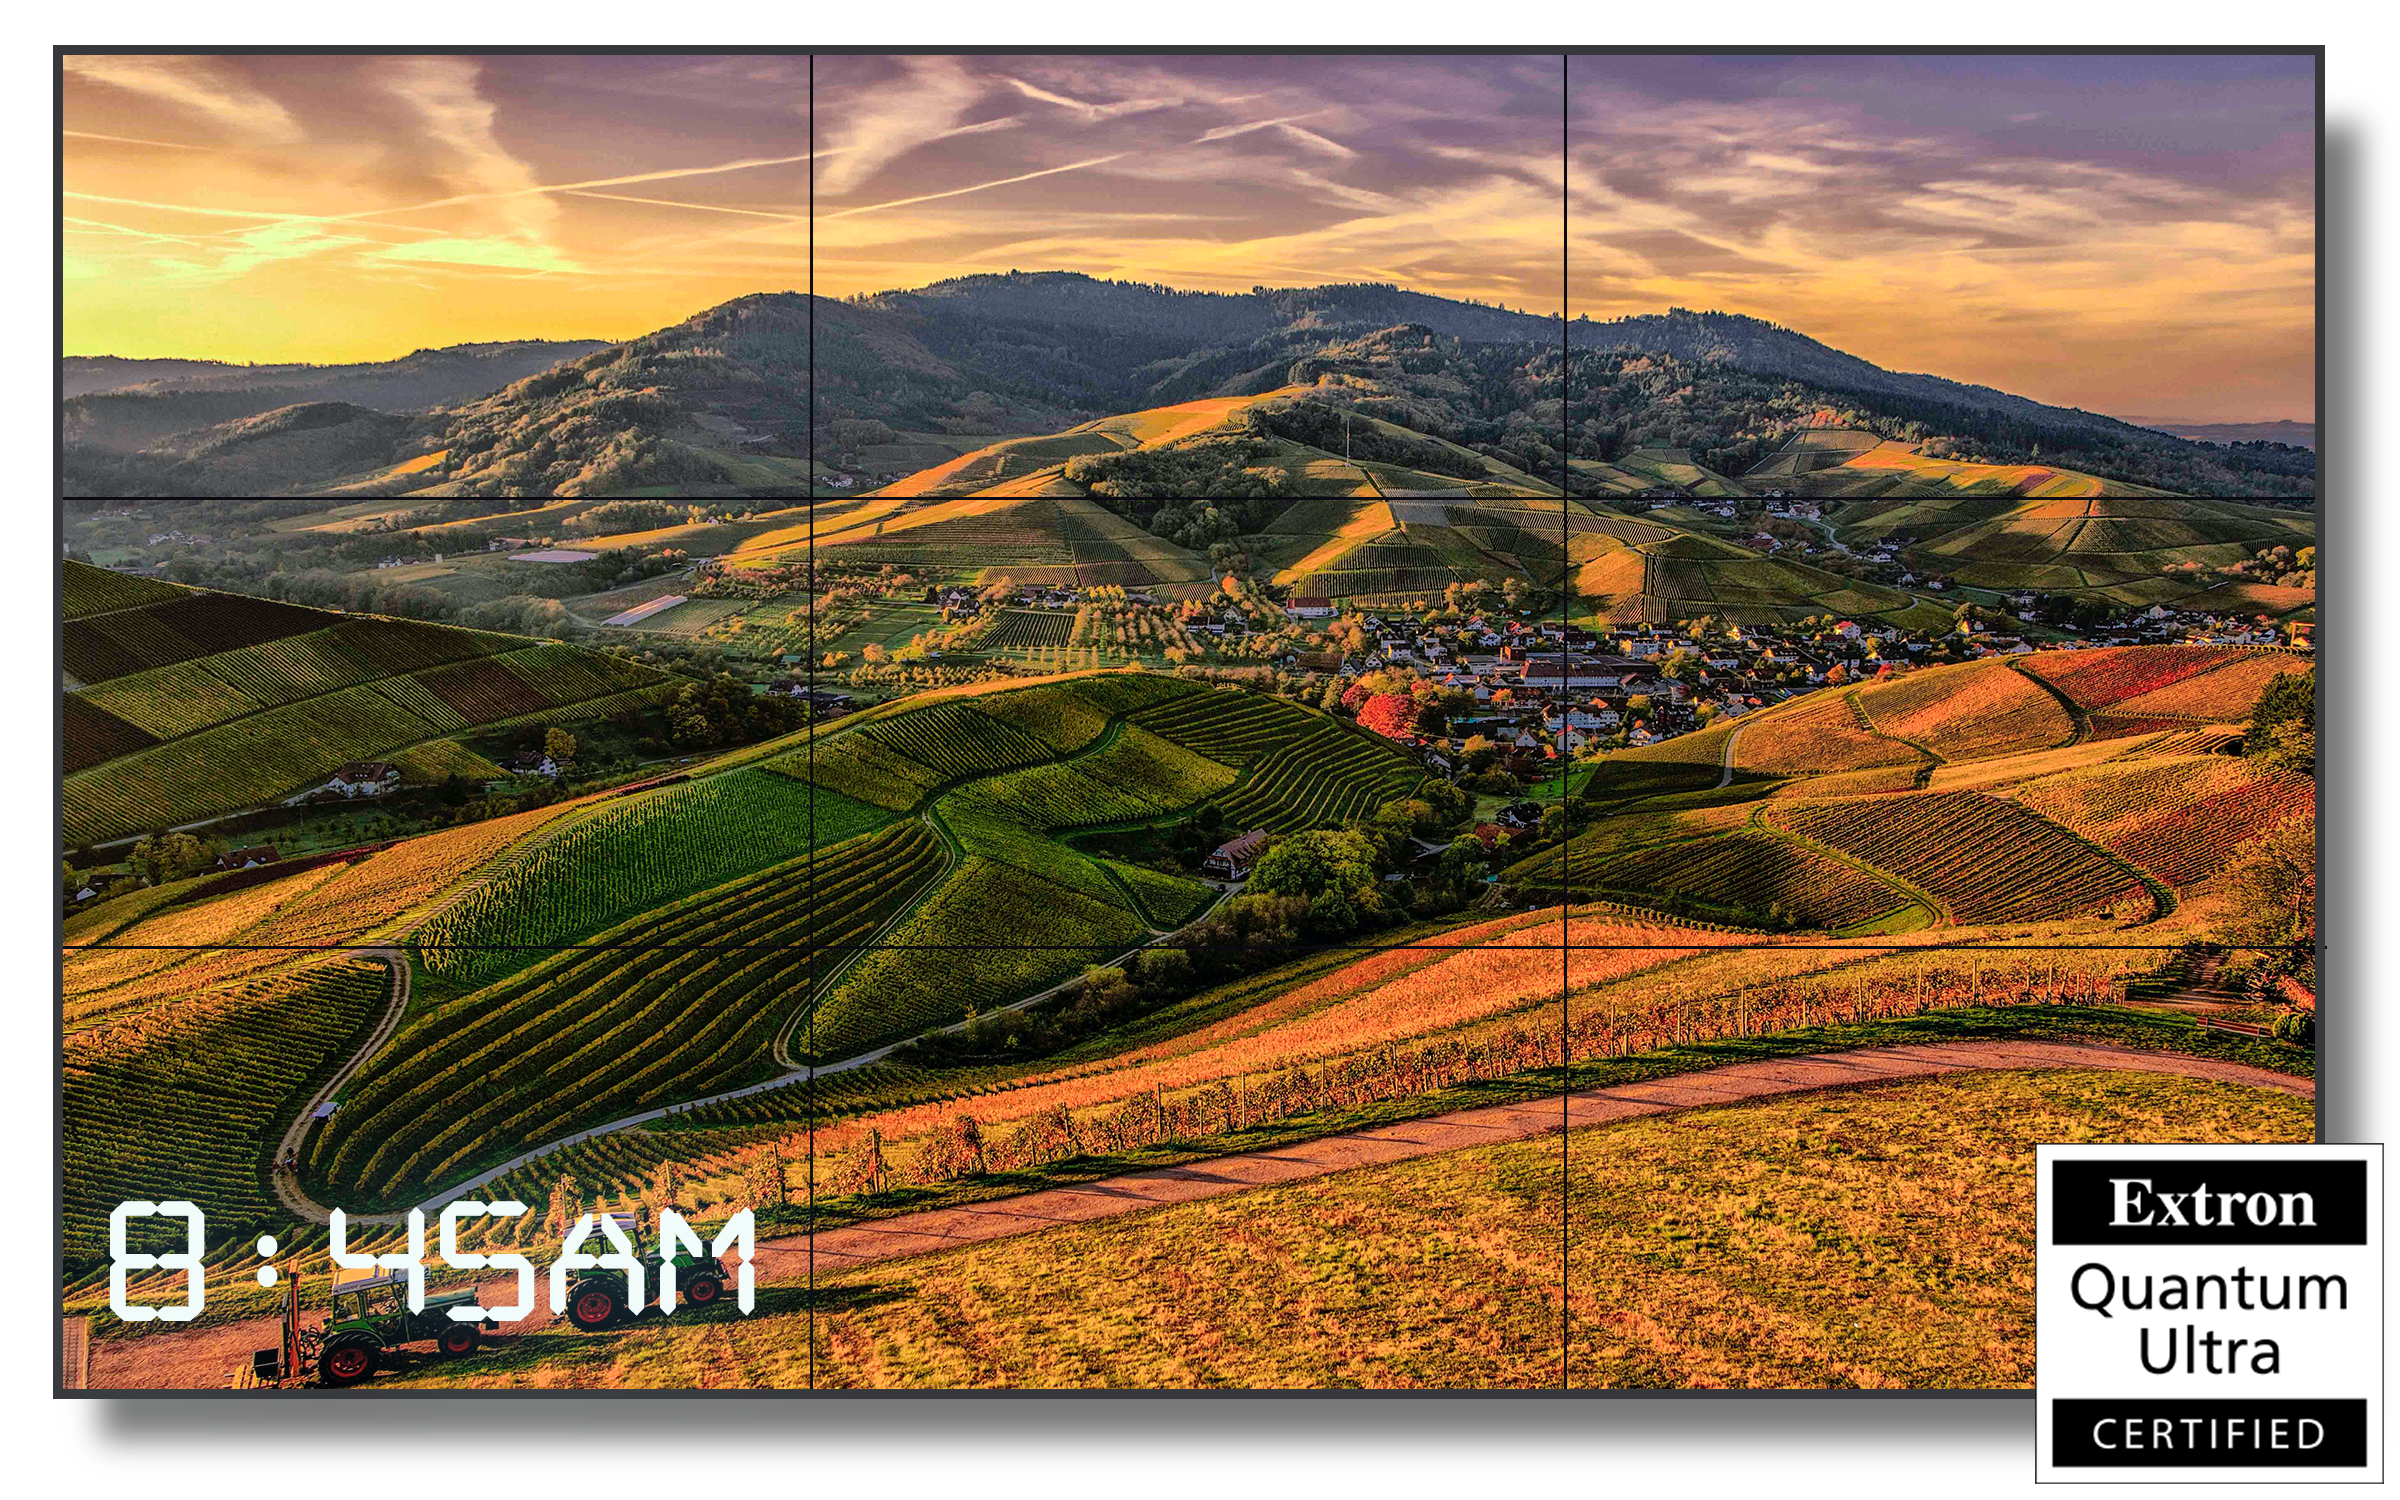 Three by three LCD video wall with an image of a rolling hills, a 8:45am timestamp and an extron quantum ultra certified icon.